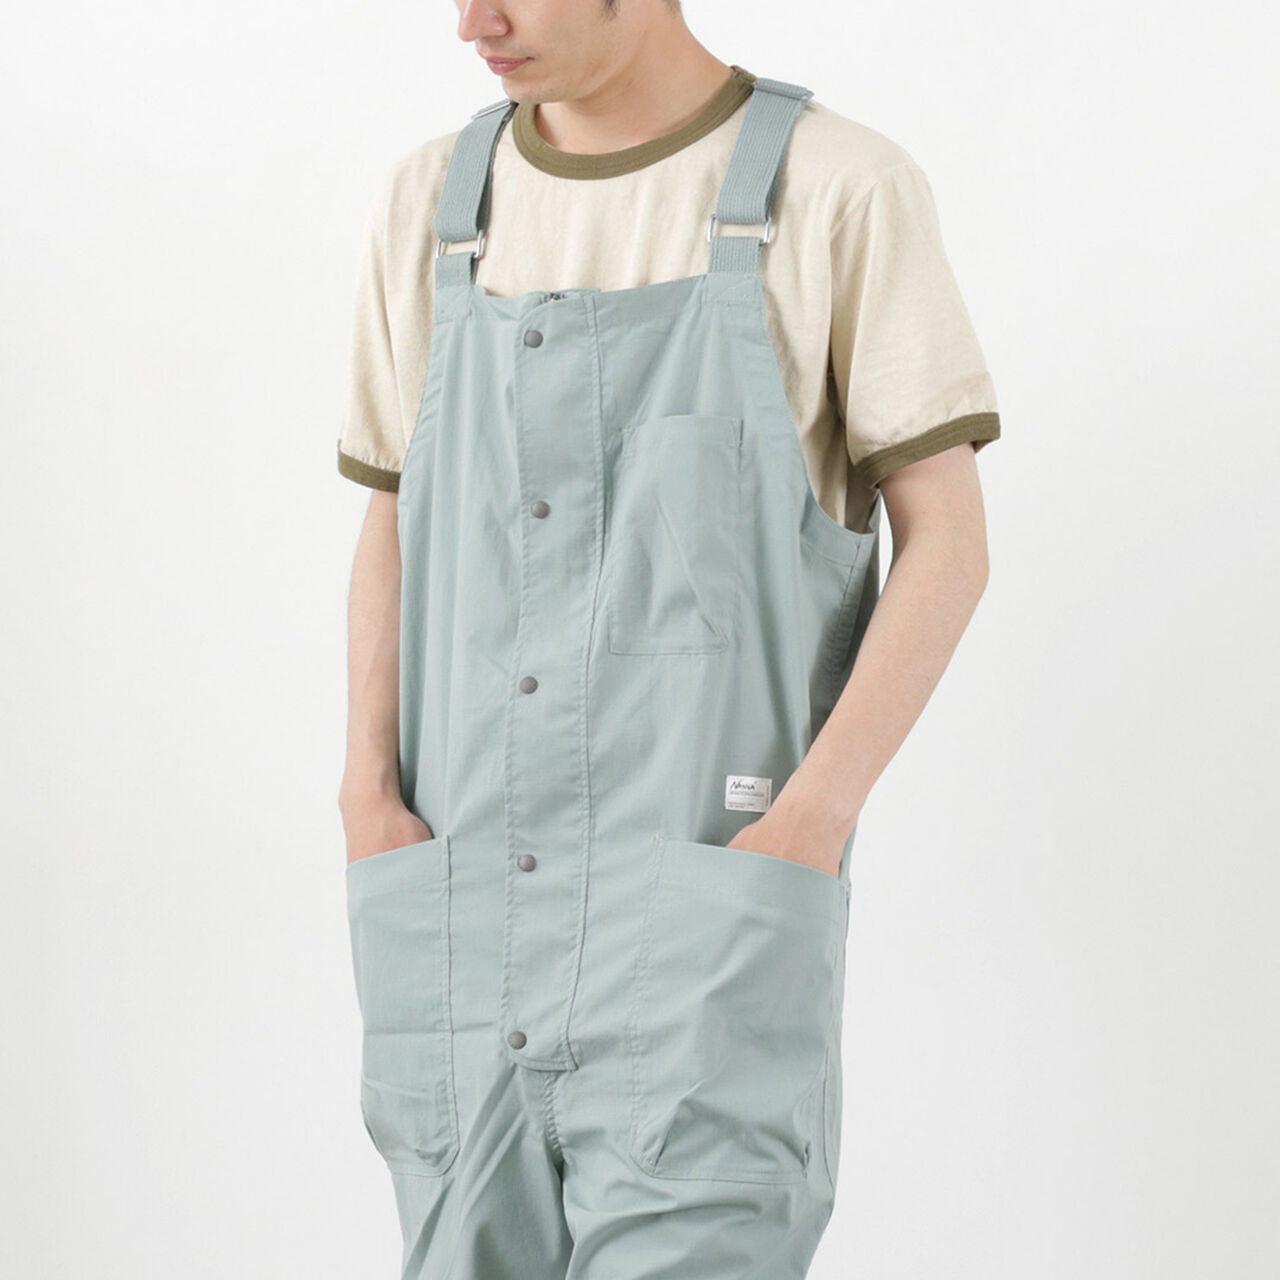 HINOC RIPSTOP FIELD OVERALLS,Sage, large image number 0